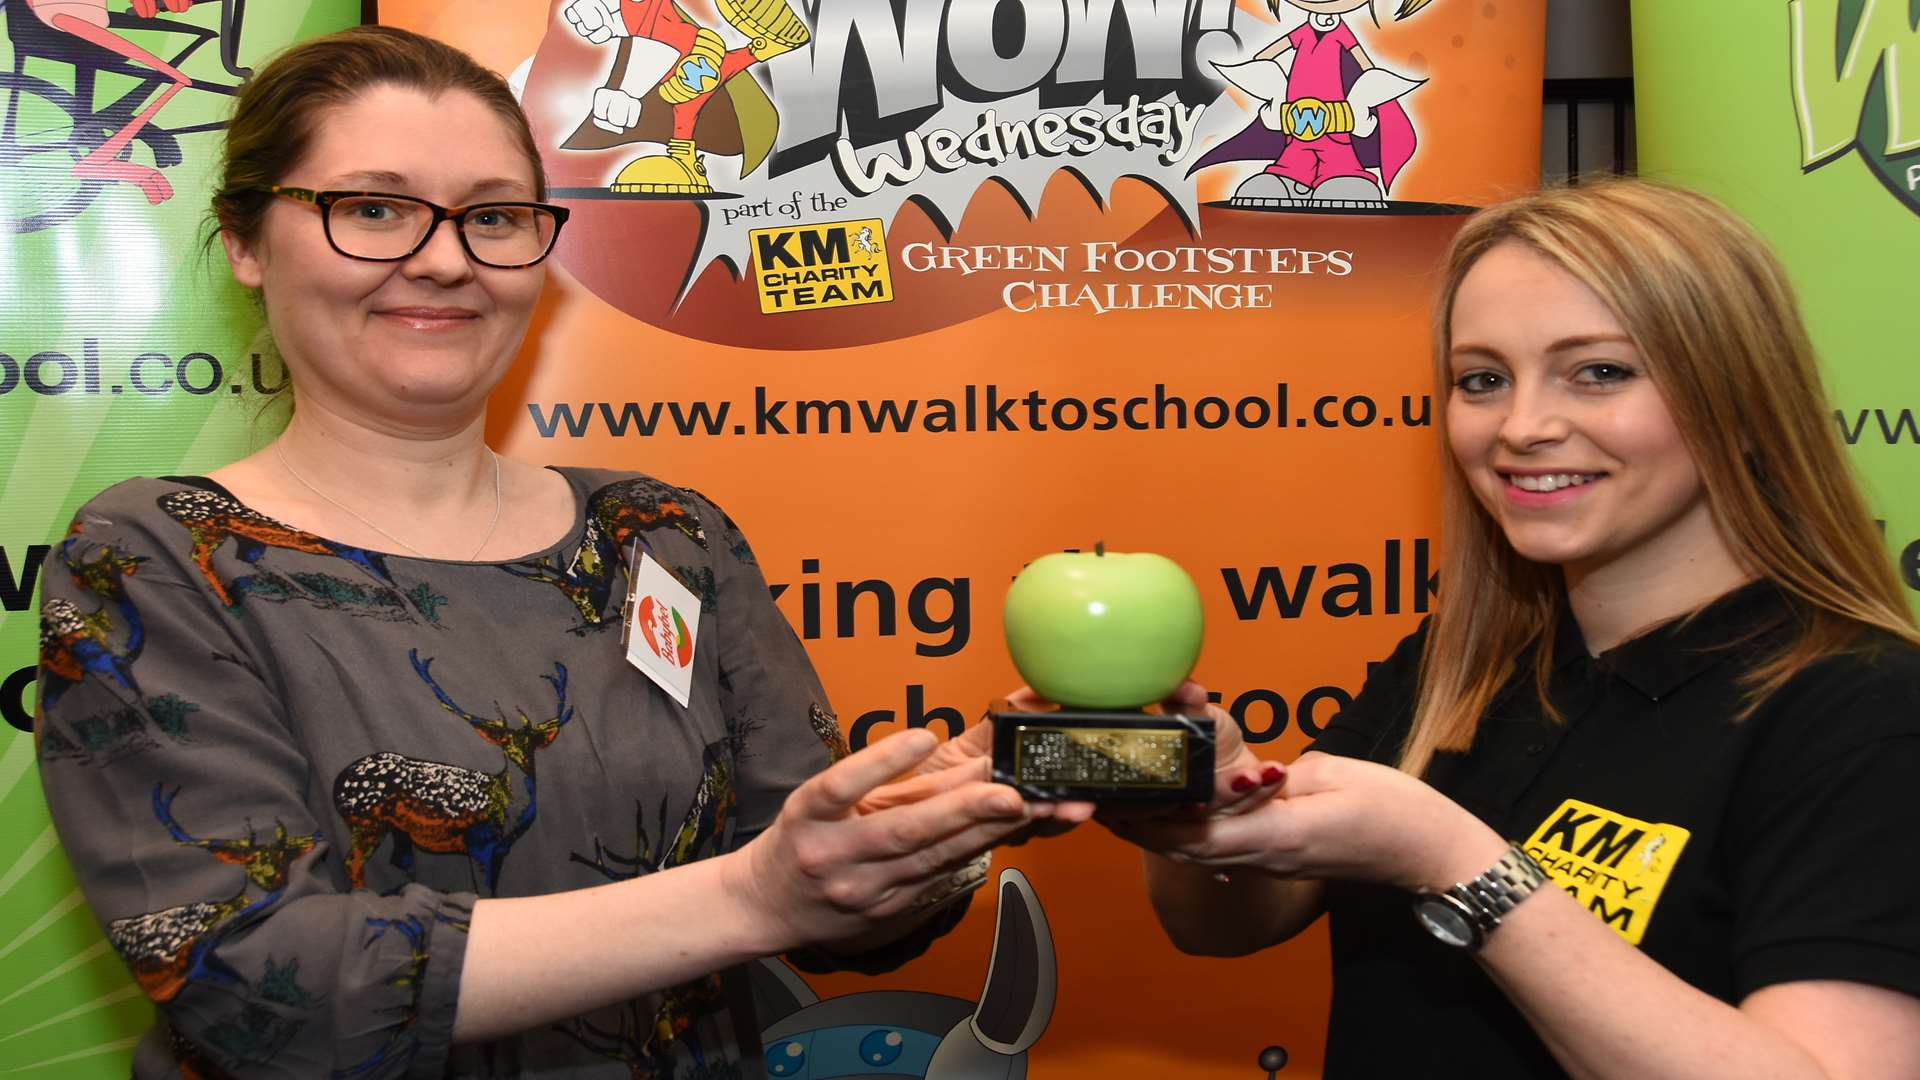 Sophie Wallace of the KM Charity Team presents Chloe Feminier of Bel UK with a Green Apple environmental award at the KM Charity Team Partnership Awards at Hempstead House, Sittingbourne